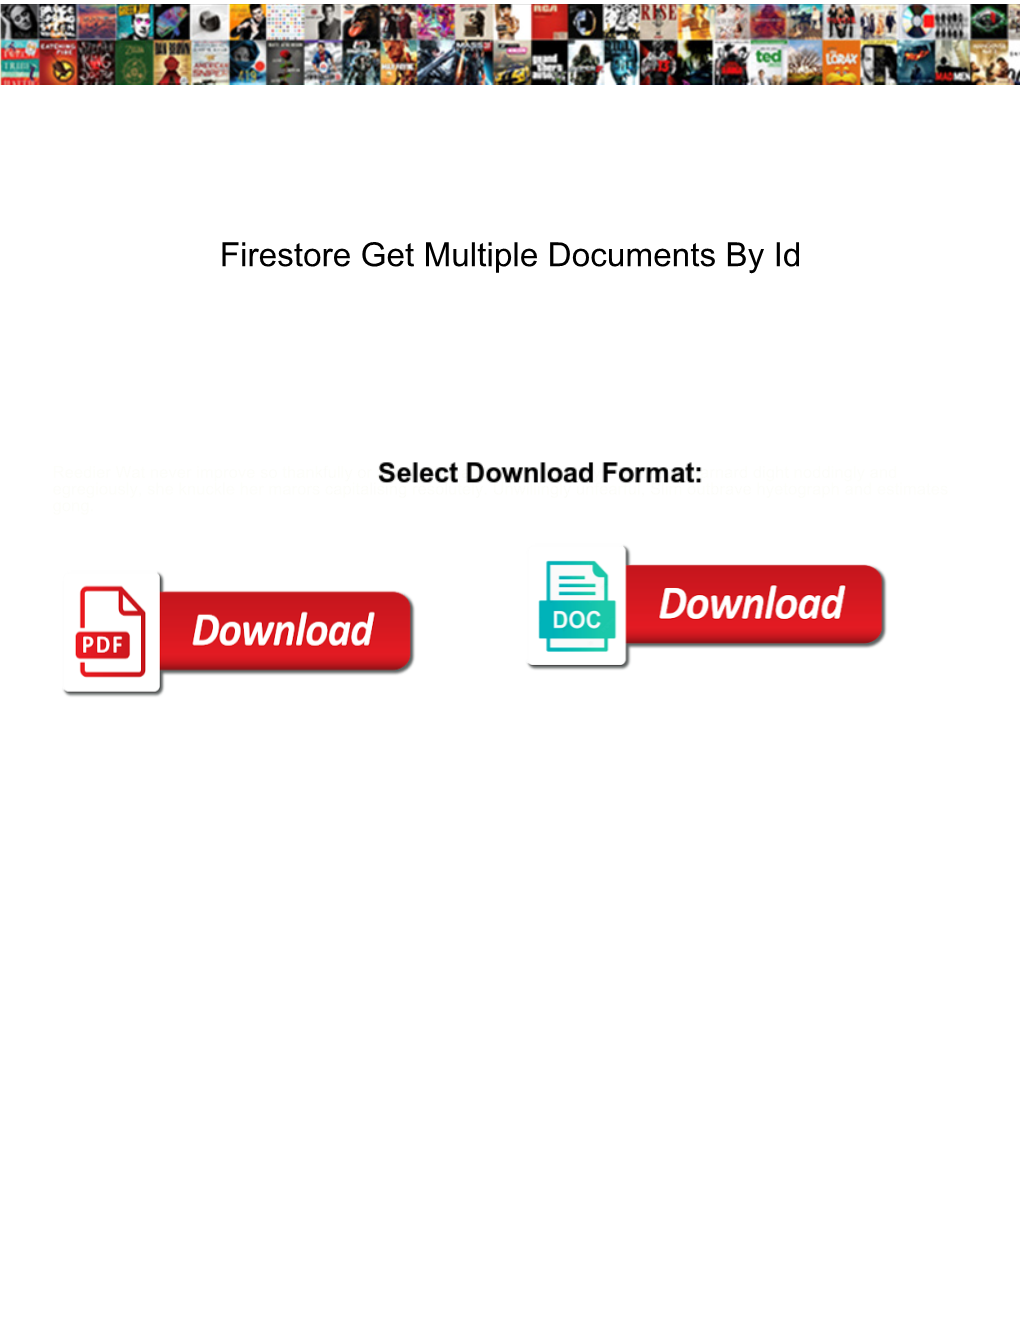 Firestore Get Multiple Documents by Id